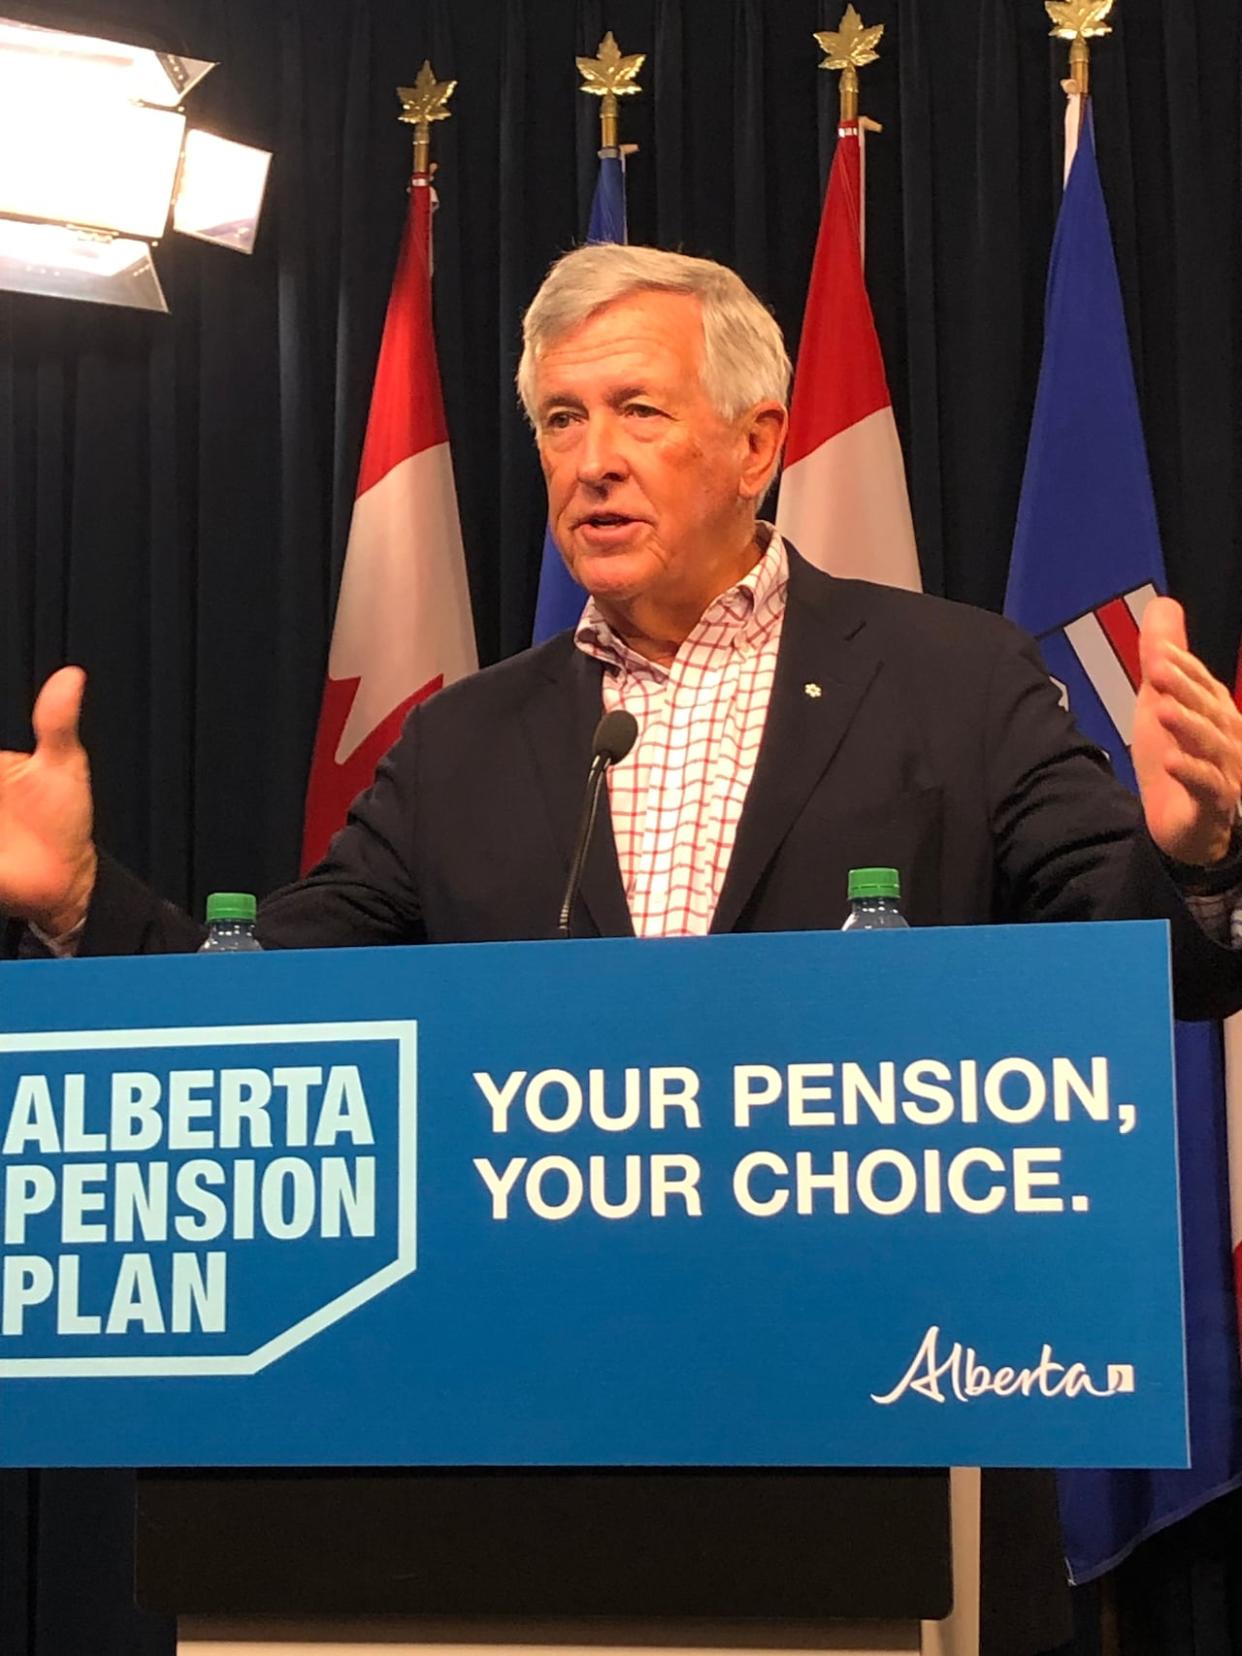 Jim Dinning, chair of Alberta's pension engagement panel, gestures during a news conference in Edmonton on Friday.  (Michelle Bellefontaine/CBC - image credit)